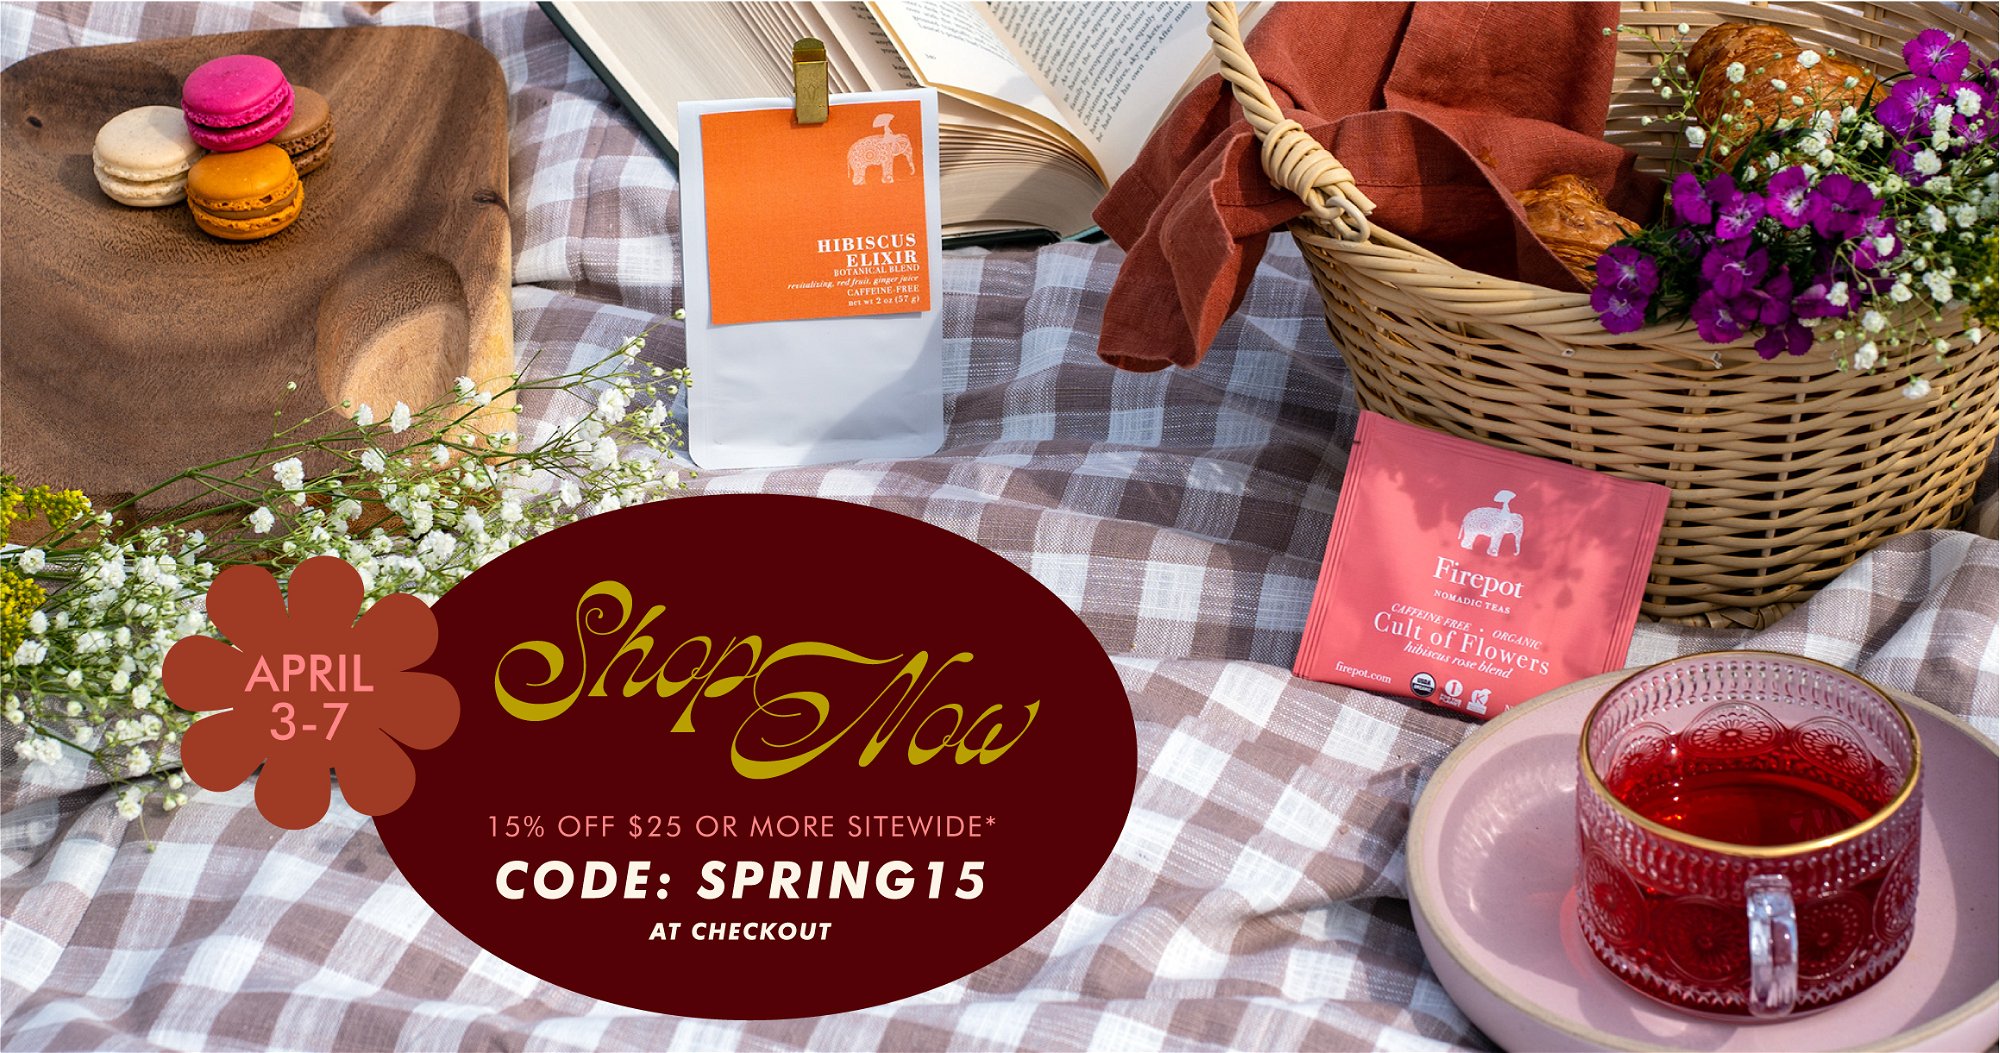 April 3-7, shop 15% off $25 or more sitewide with code SPRING15 at checkout